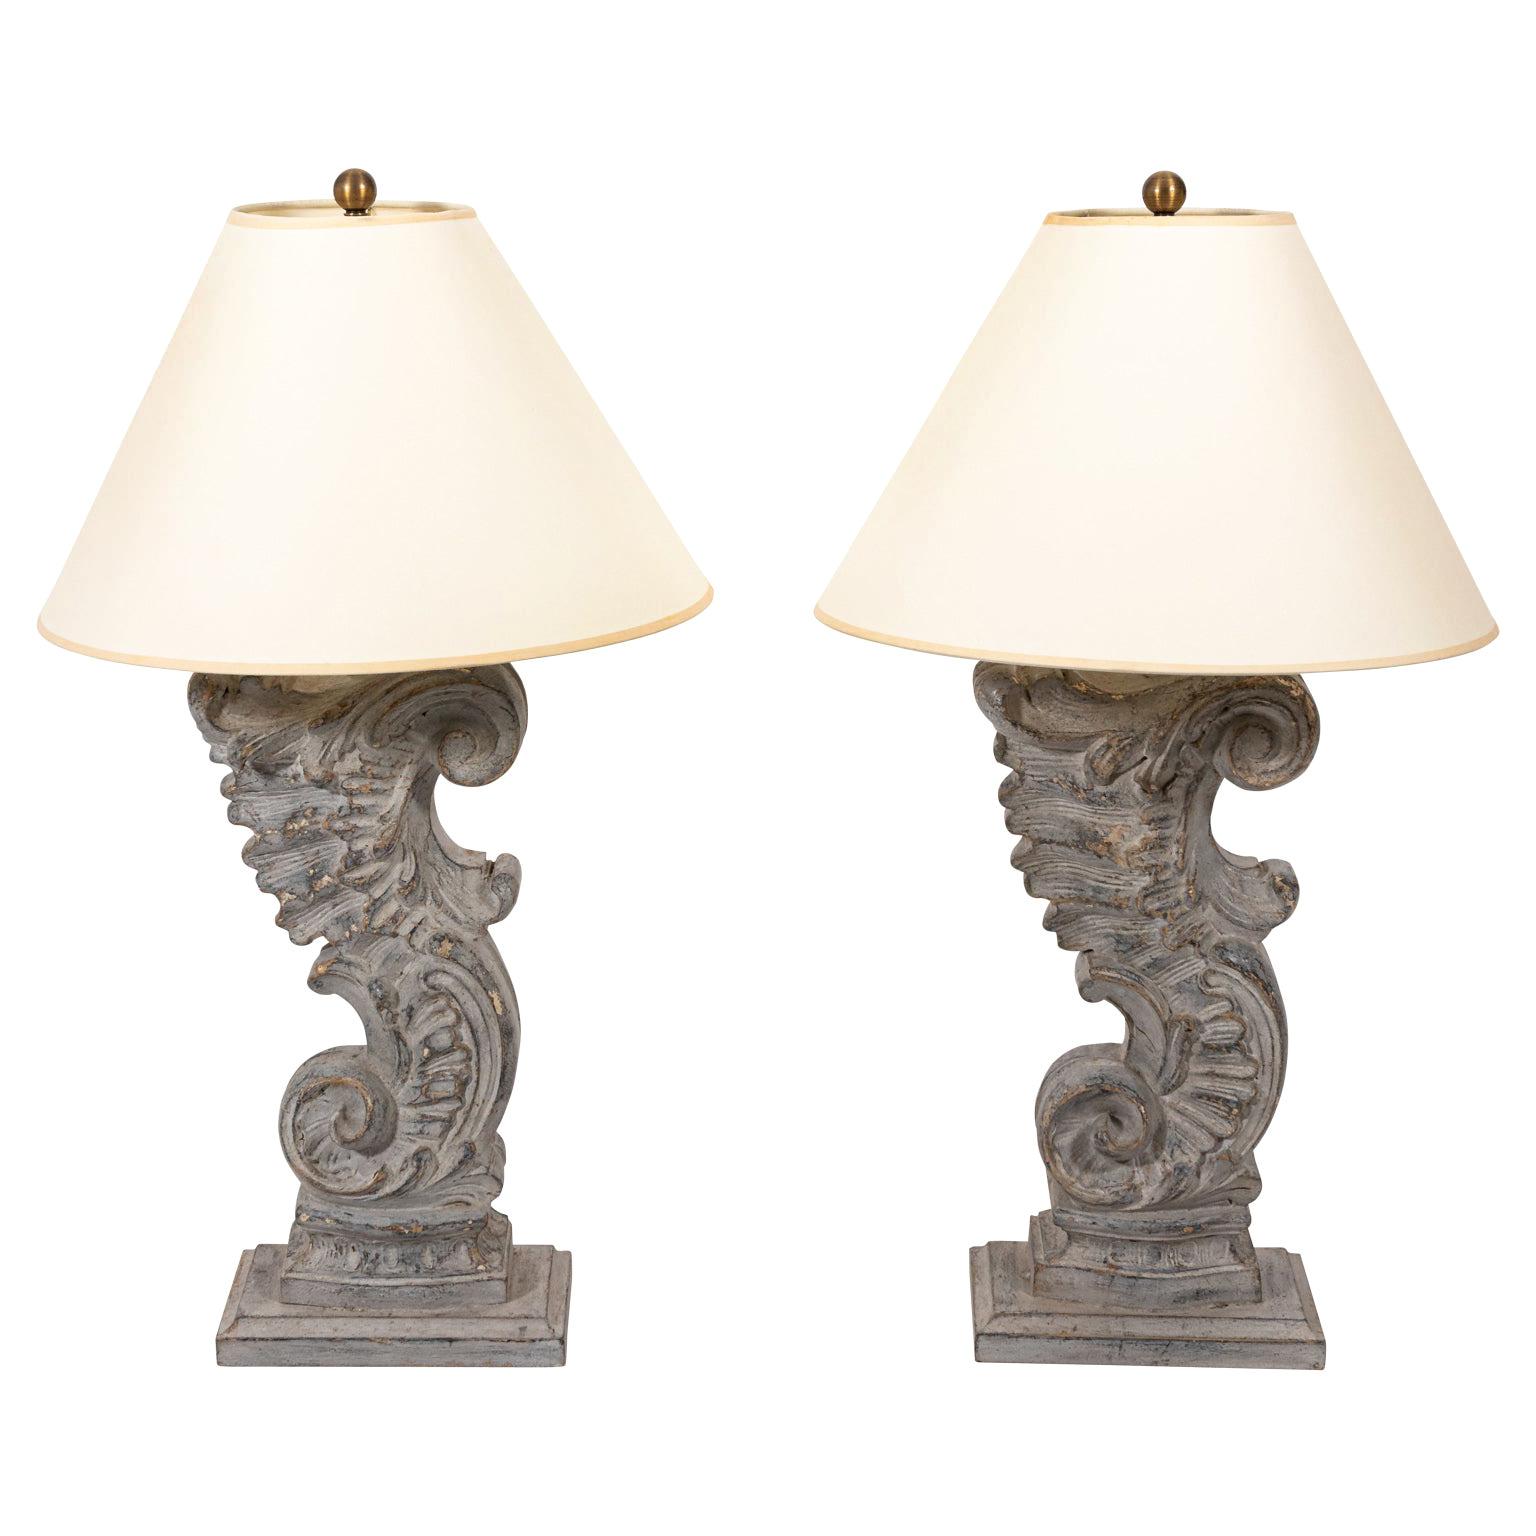 Pair of Fragment Baroque Architectural Fragment Table Lamps